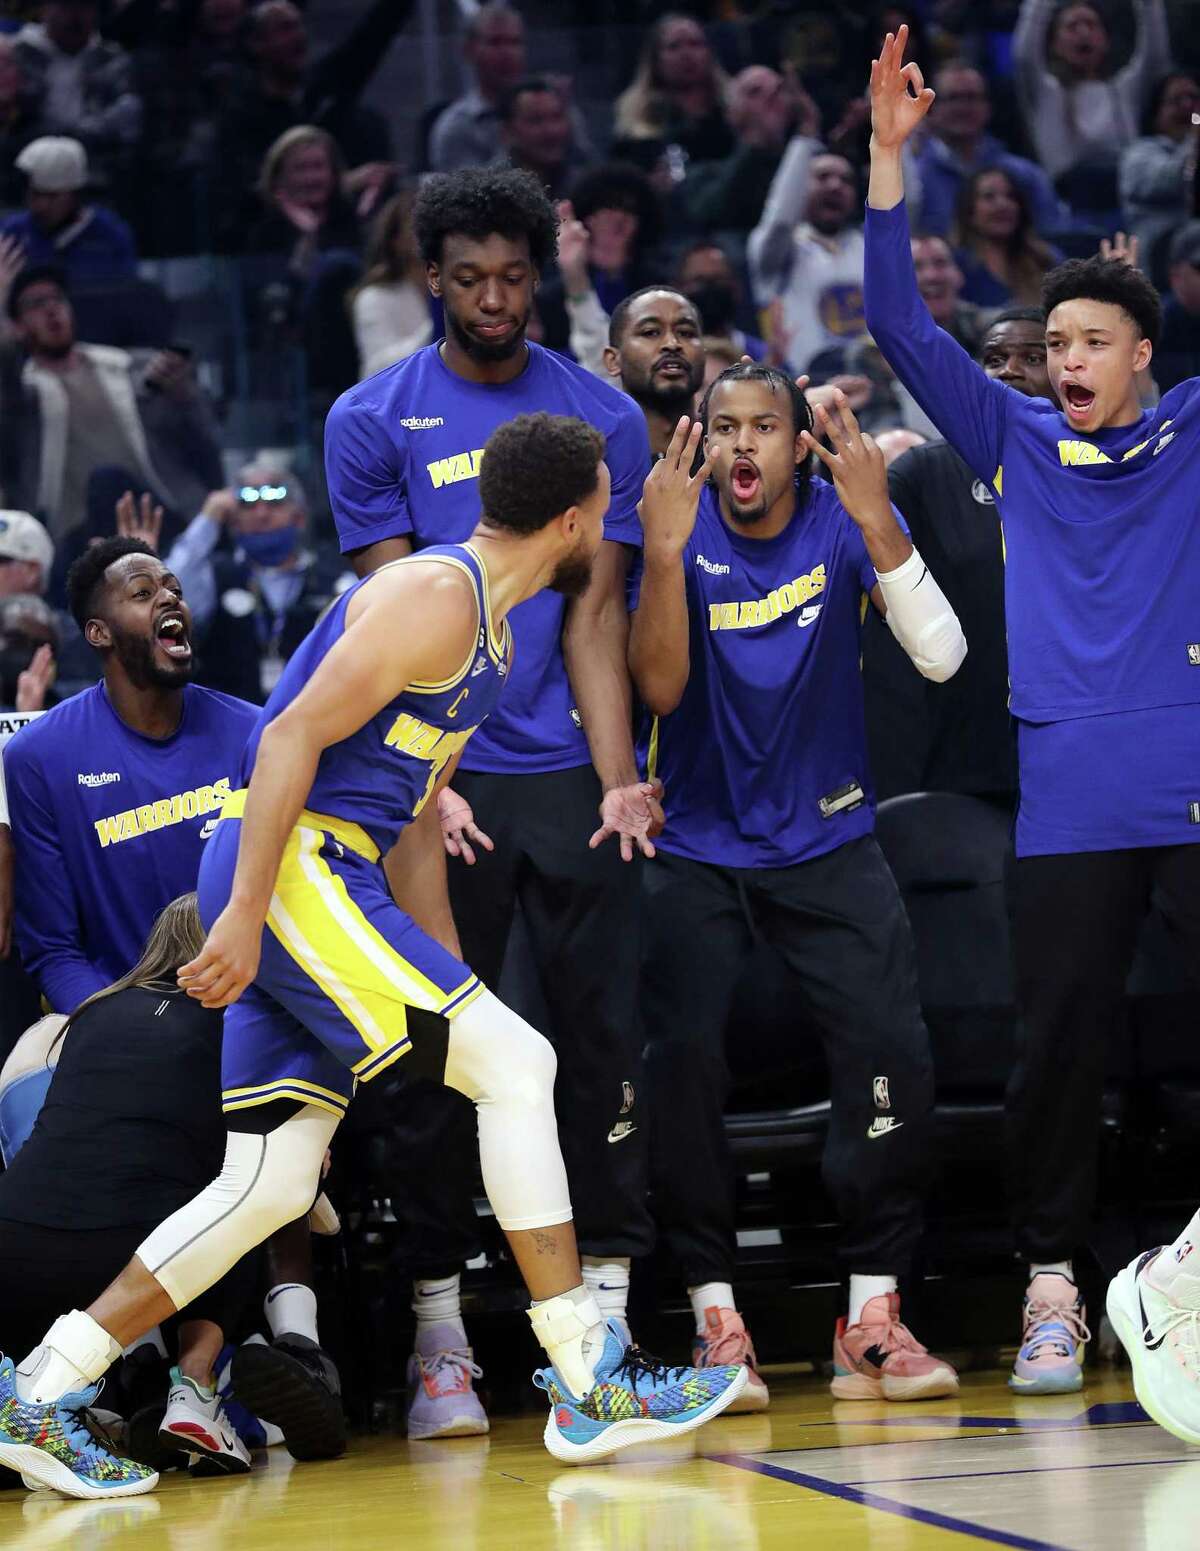 Golden State Warriors’ Moses Moody and Ryan Rollins react to a Stephen Curry 3-pointer in 1st quarter against San Antonio Spurs during NBA game at Chase Center in San Francisco, Calif., on Monday, November 14, 2022.